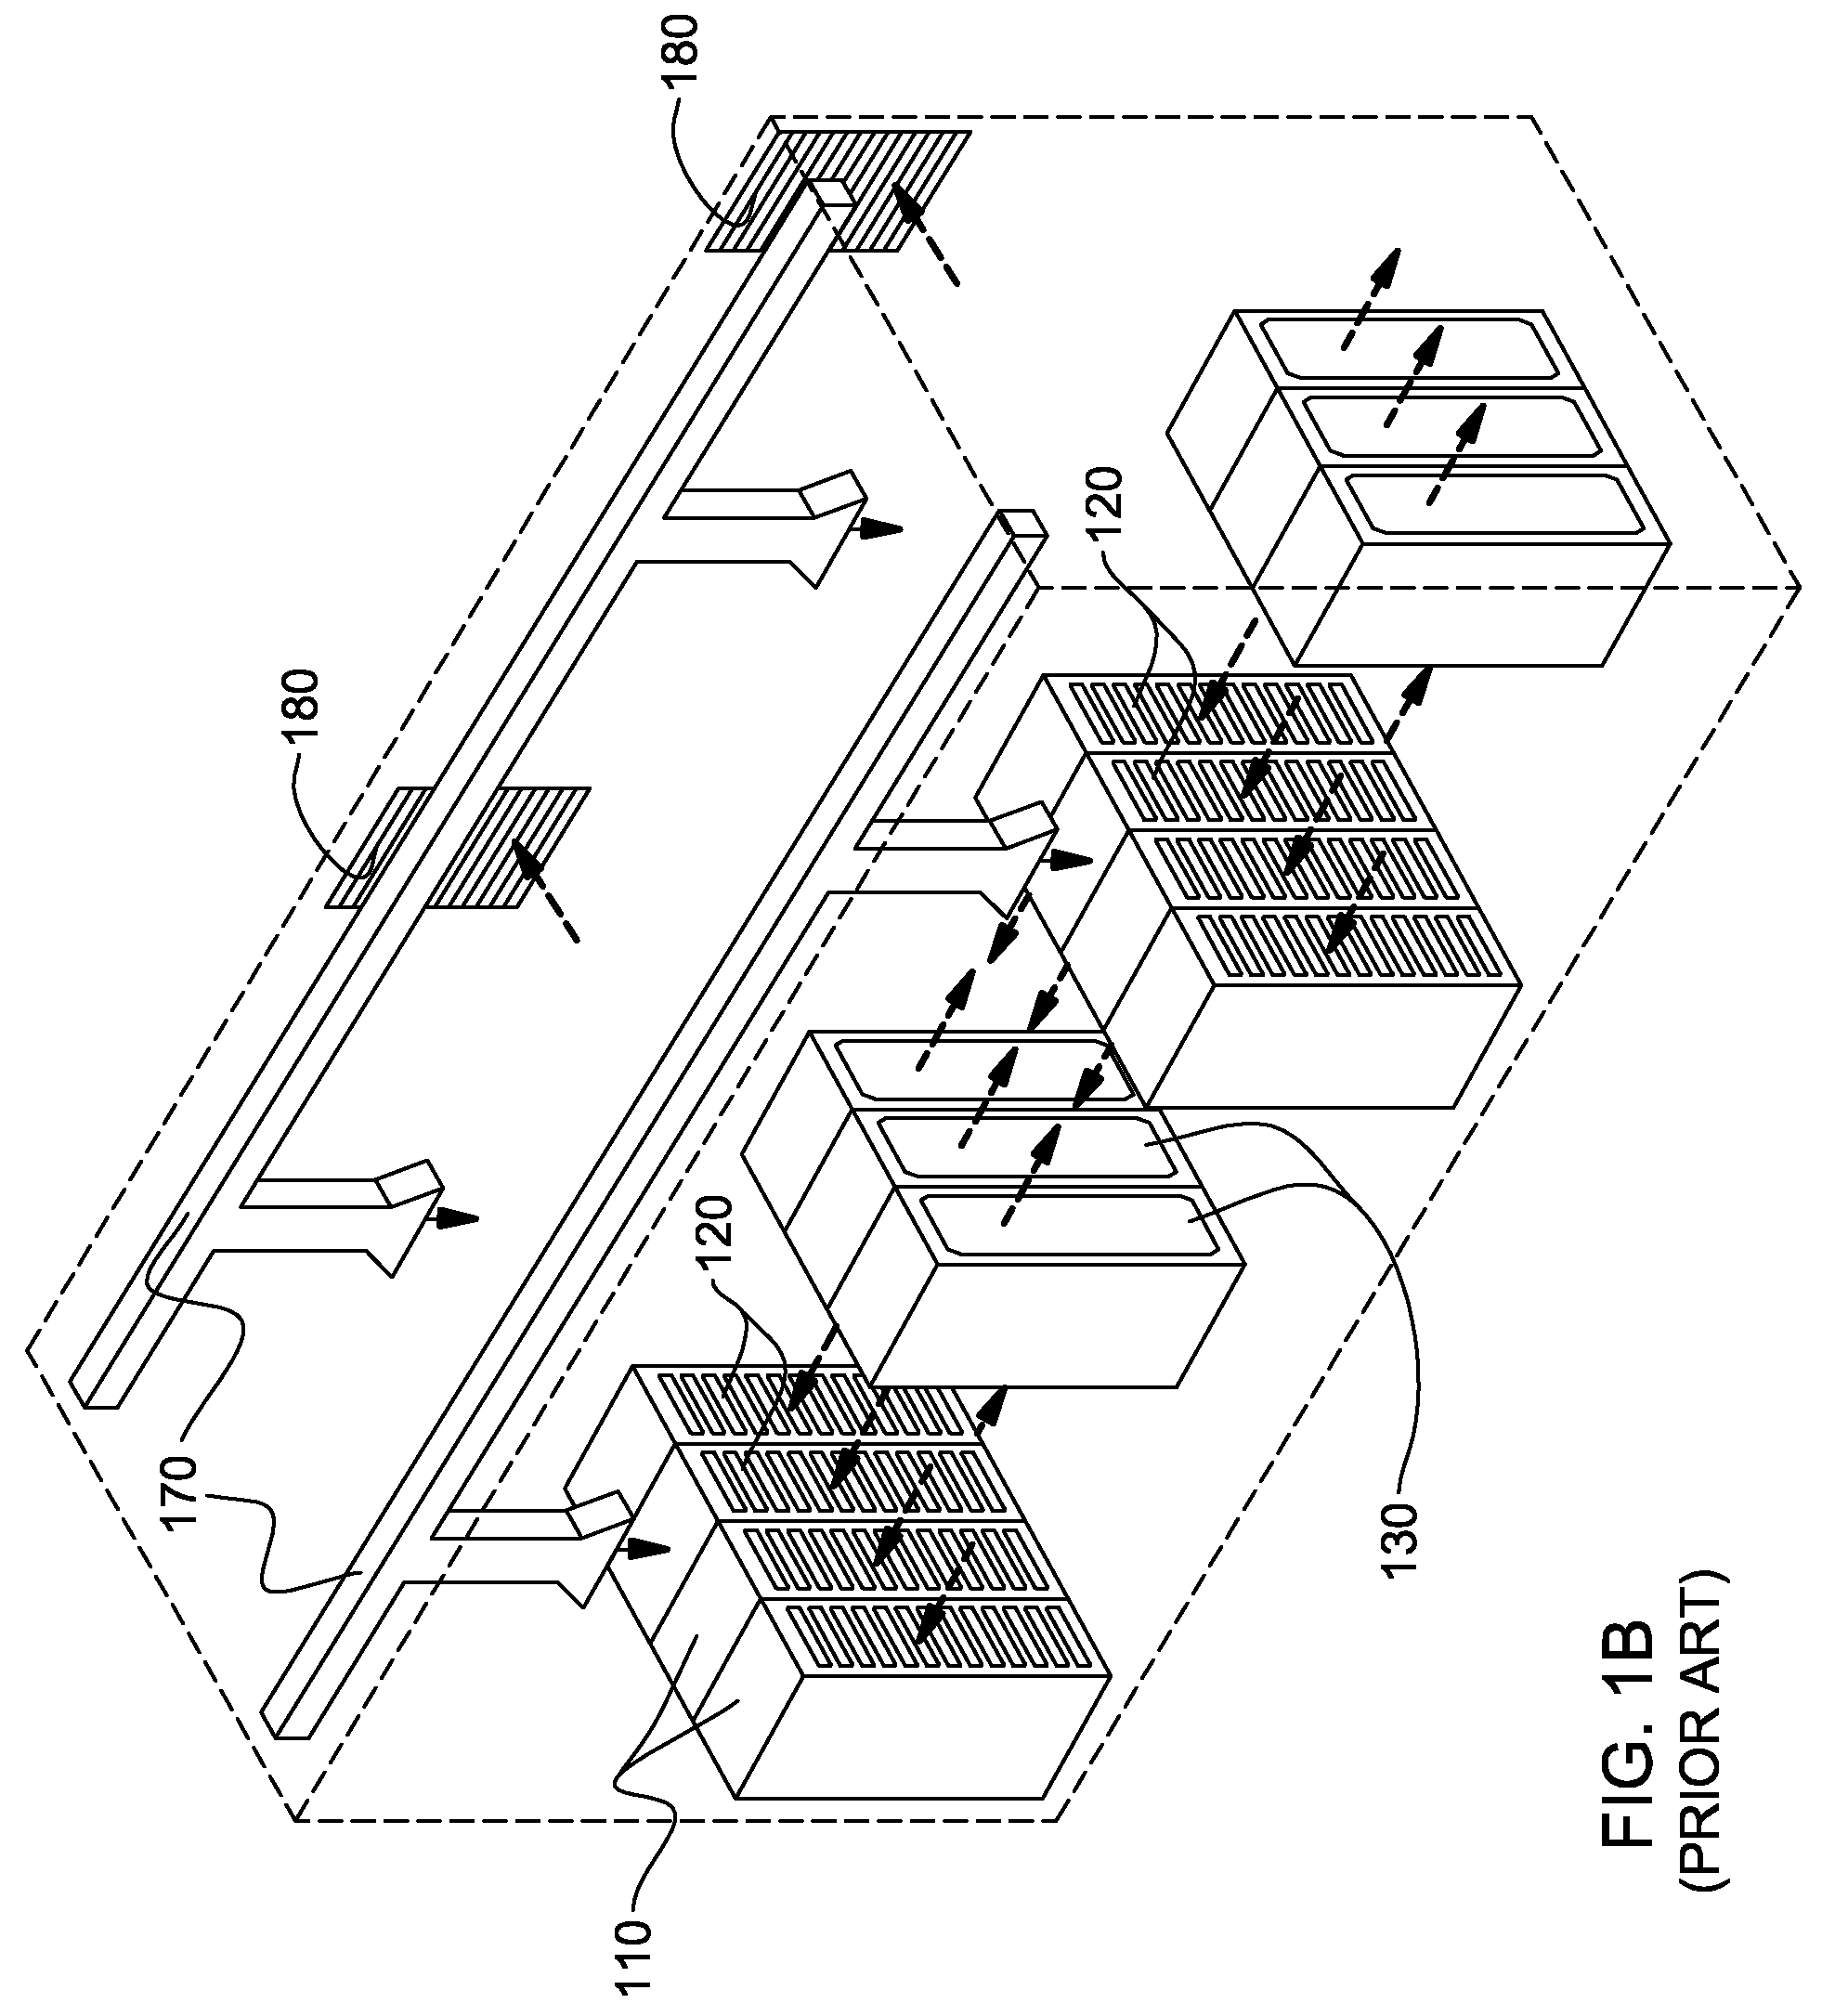 Docking station with hybrid air and liquid cooling of an electronics rack